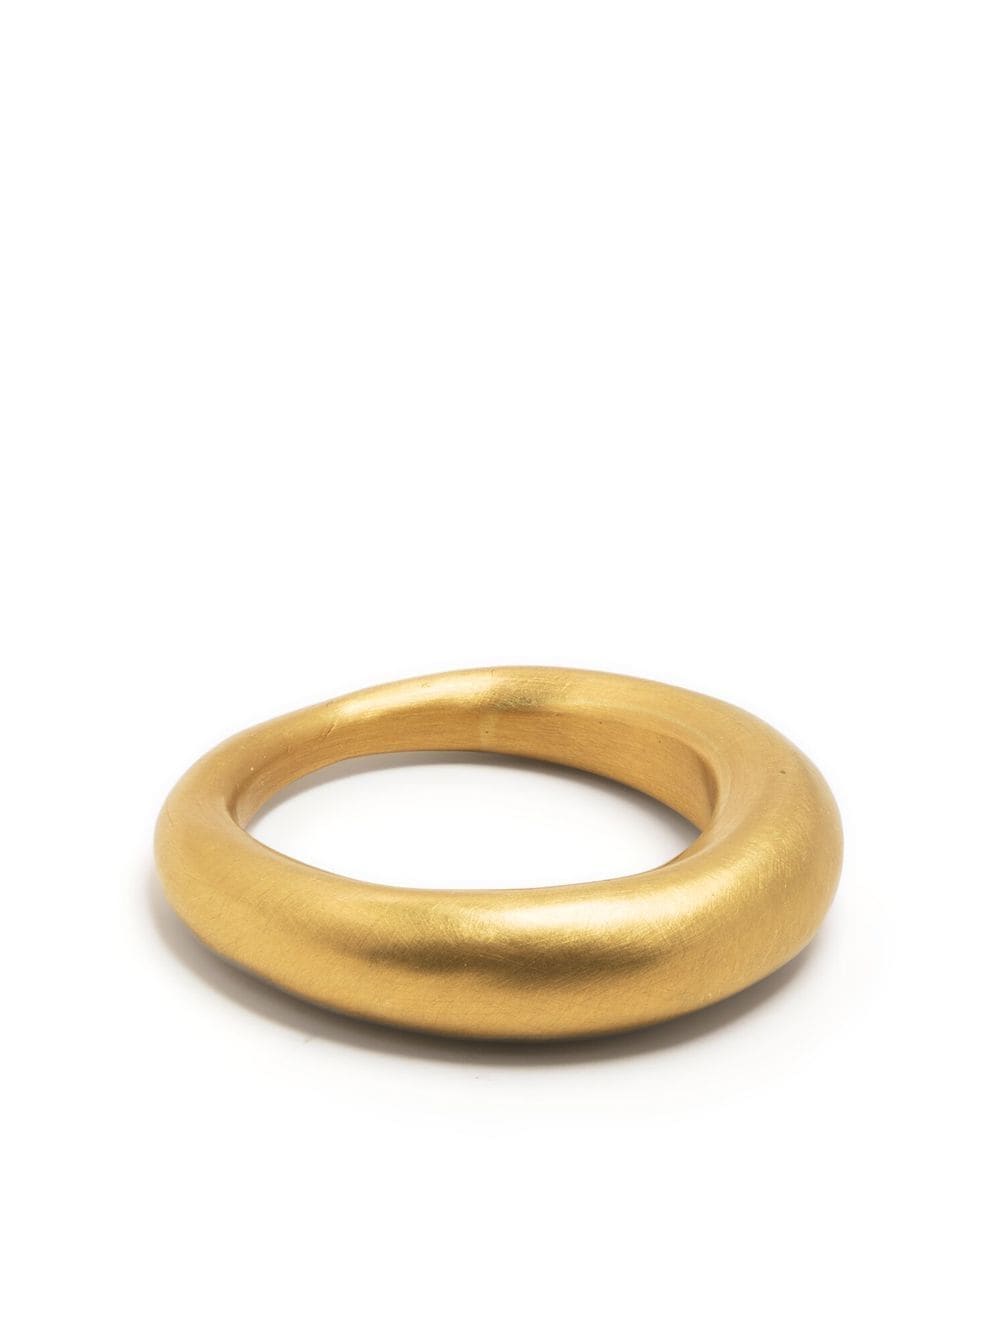 Shop Prounis 22kt Yellow Gold Trade I Ring